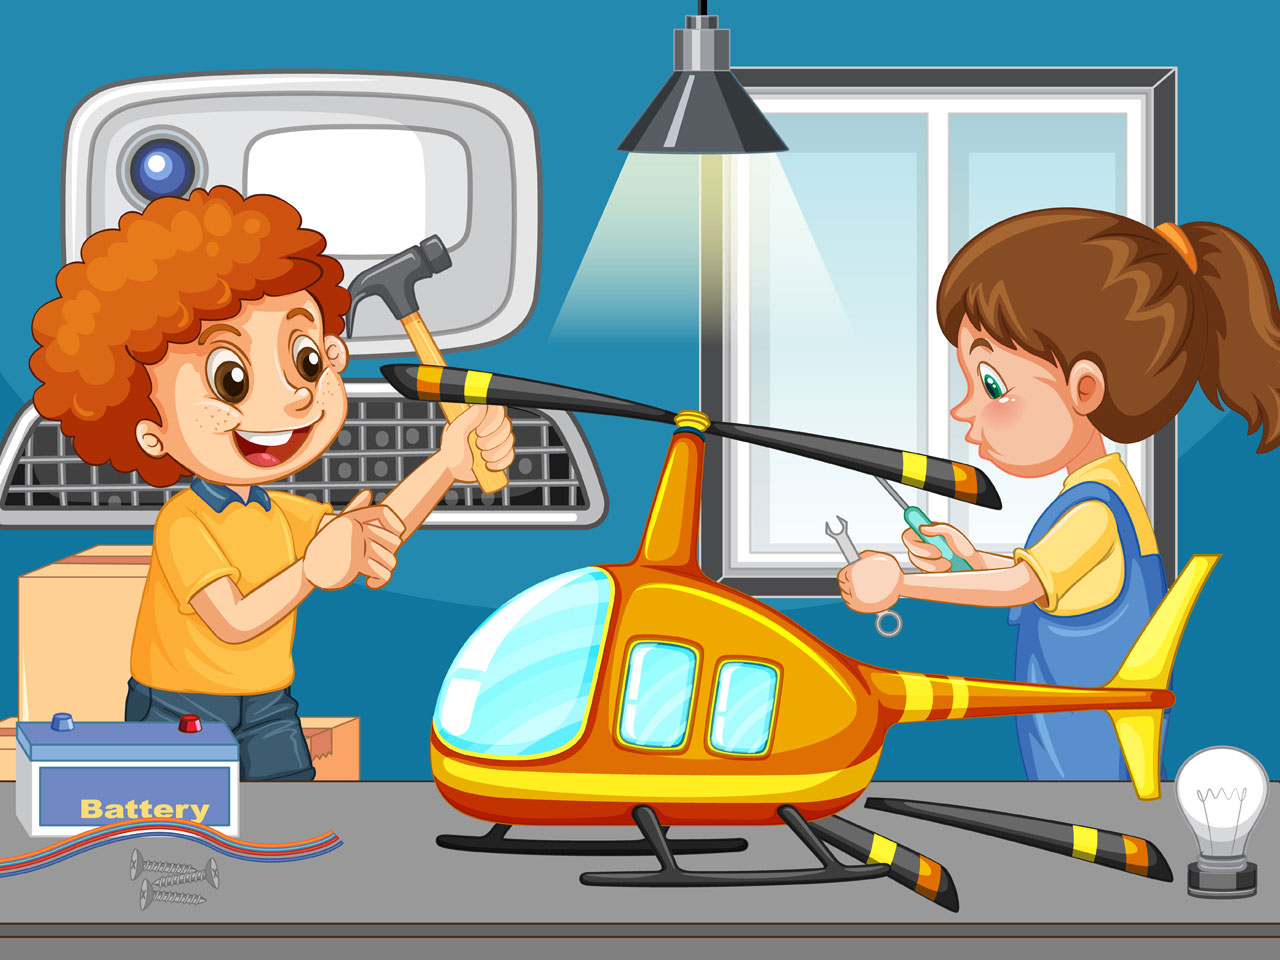 Scene with children repairing toy helicopter together